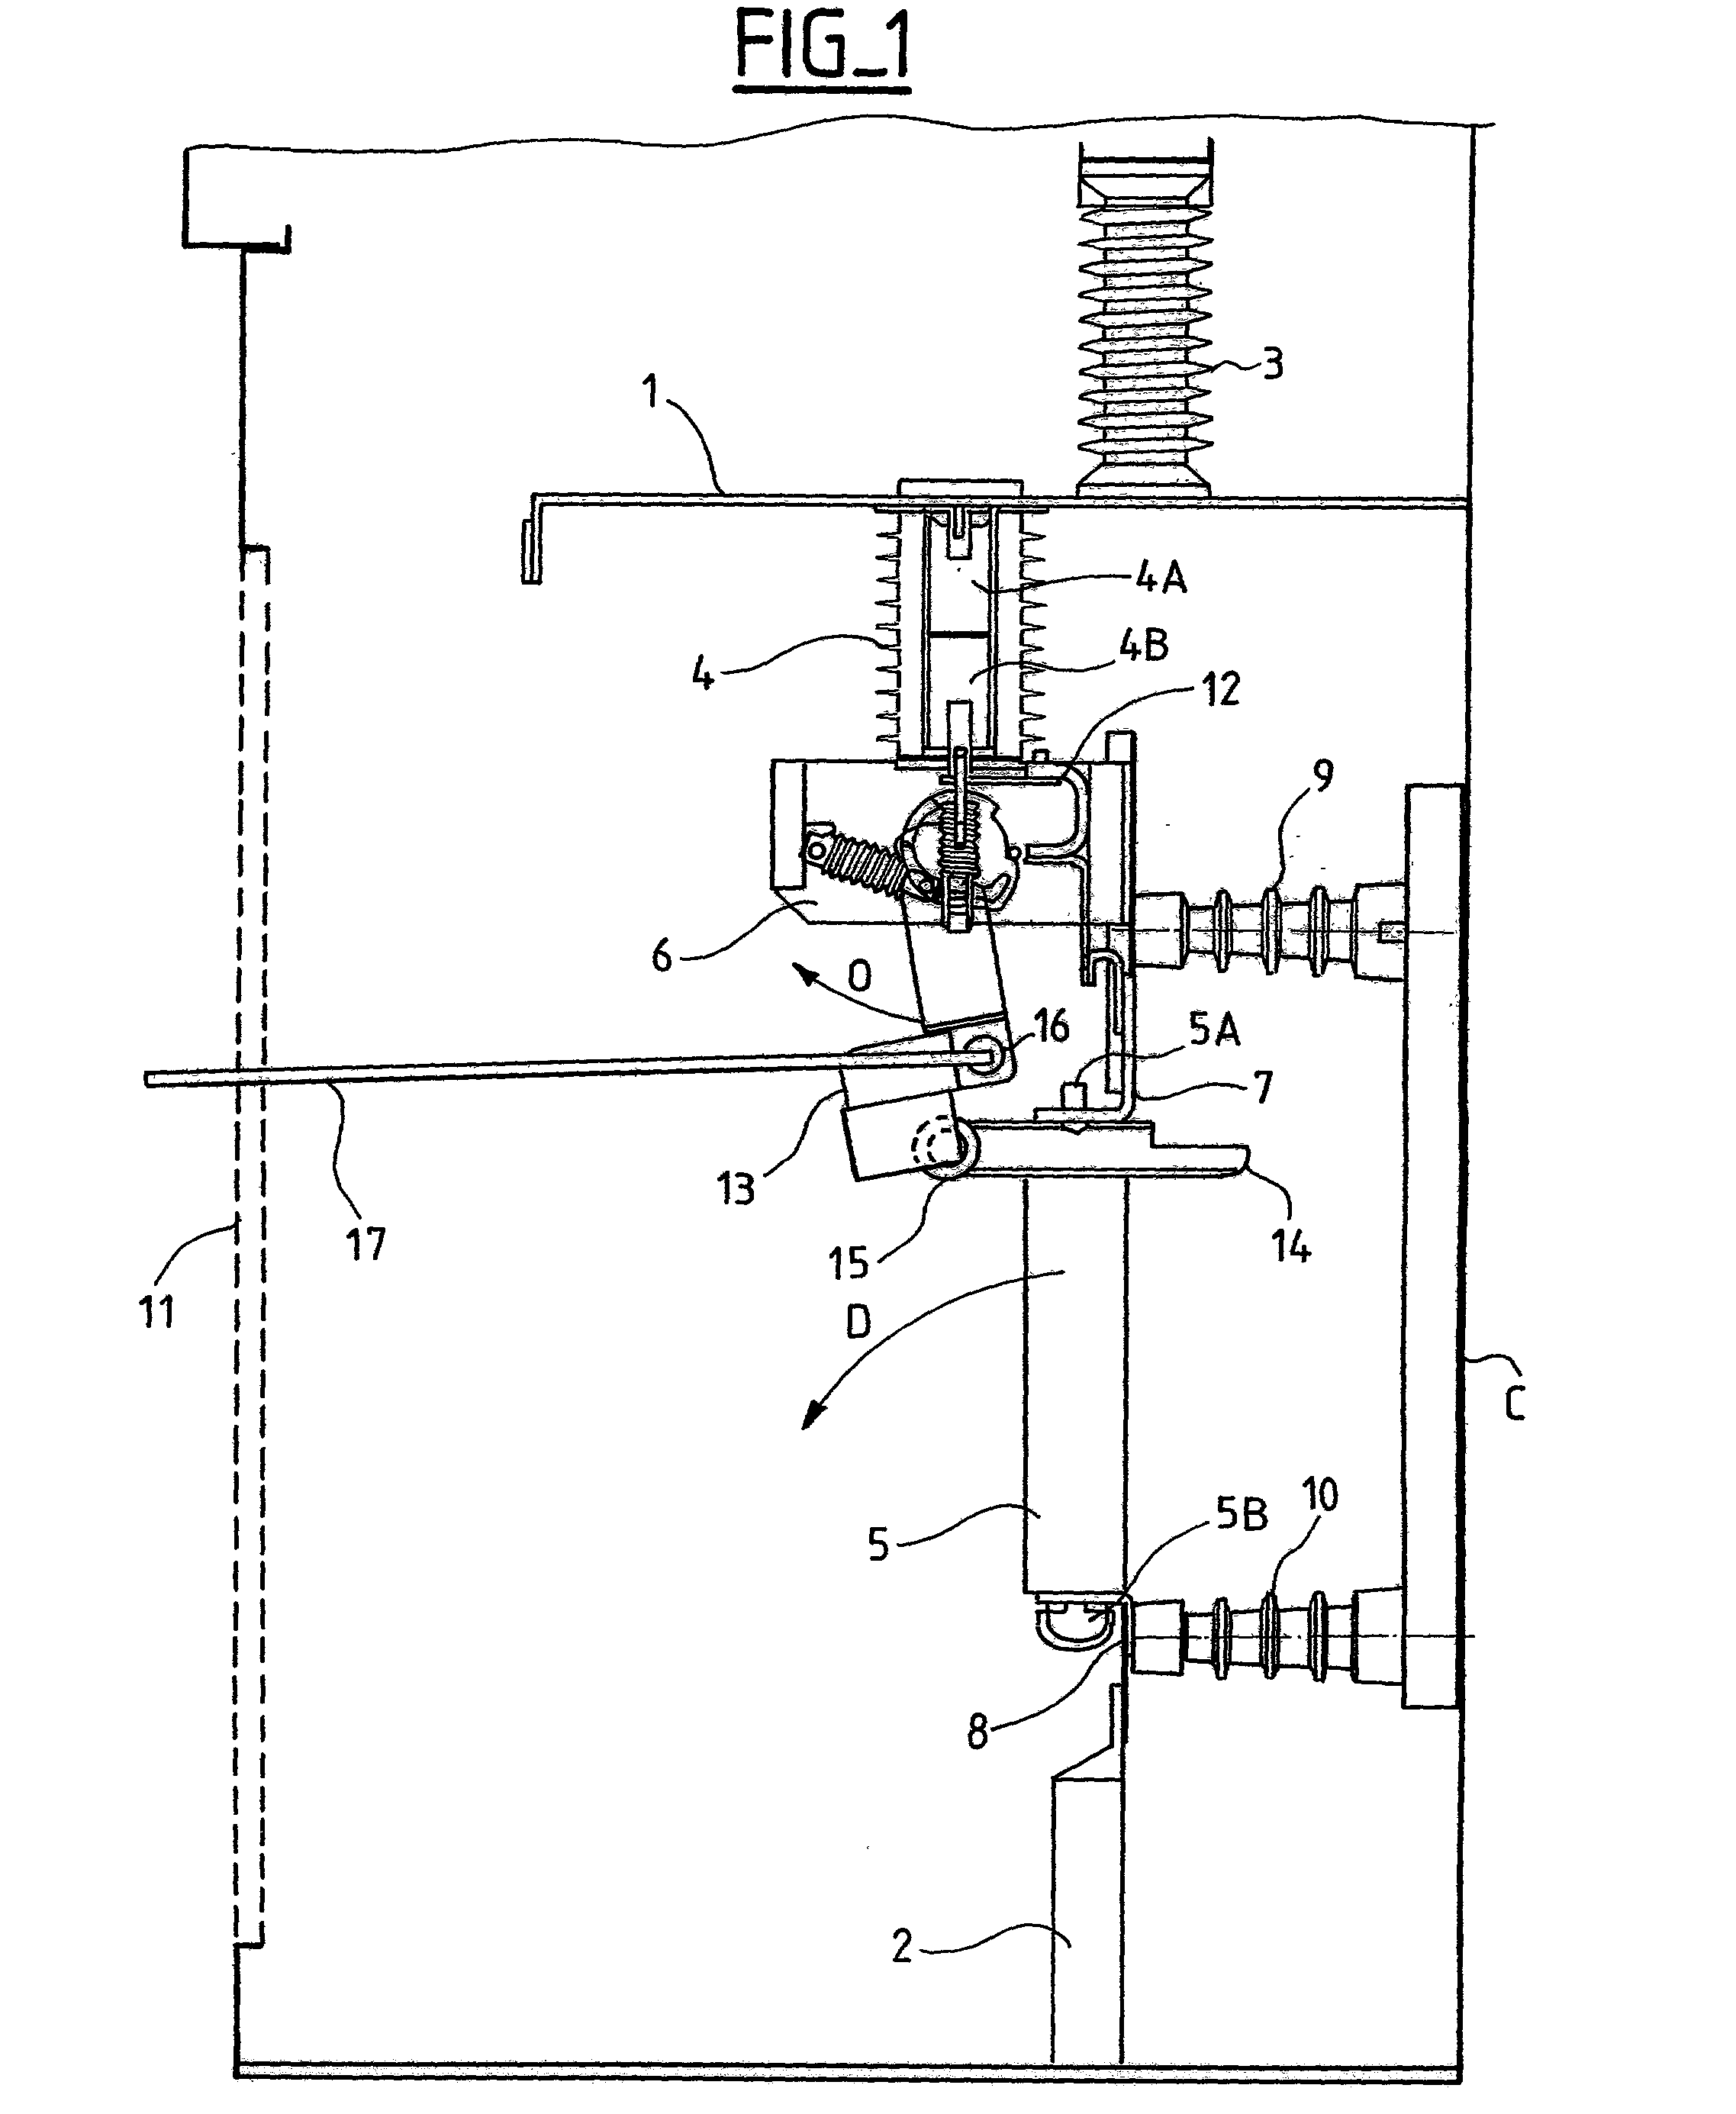 Safety device applied to engaging and disengaging a fuse in medium voltage electrical gear